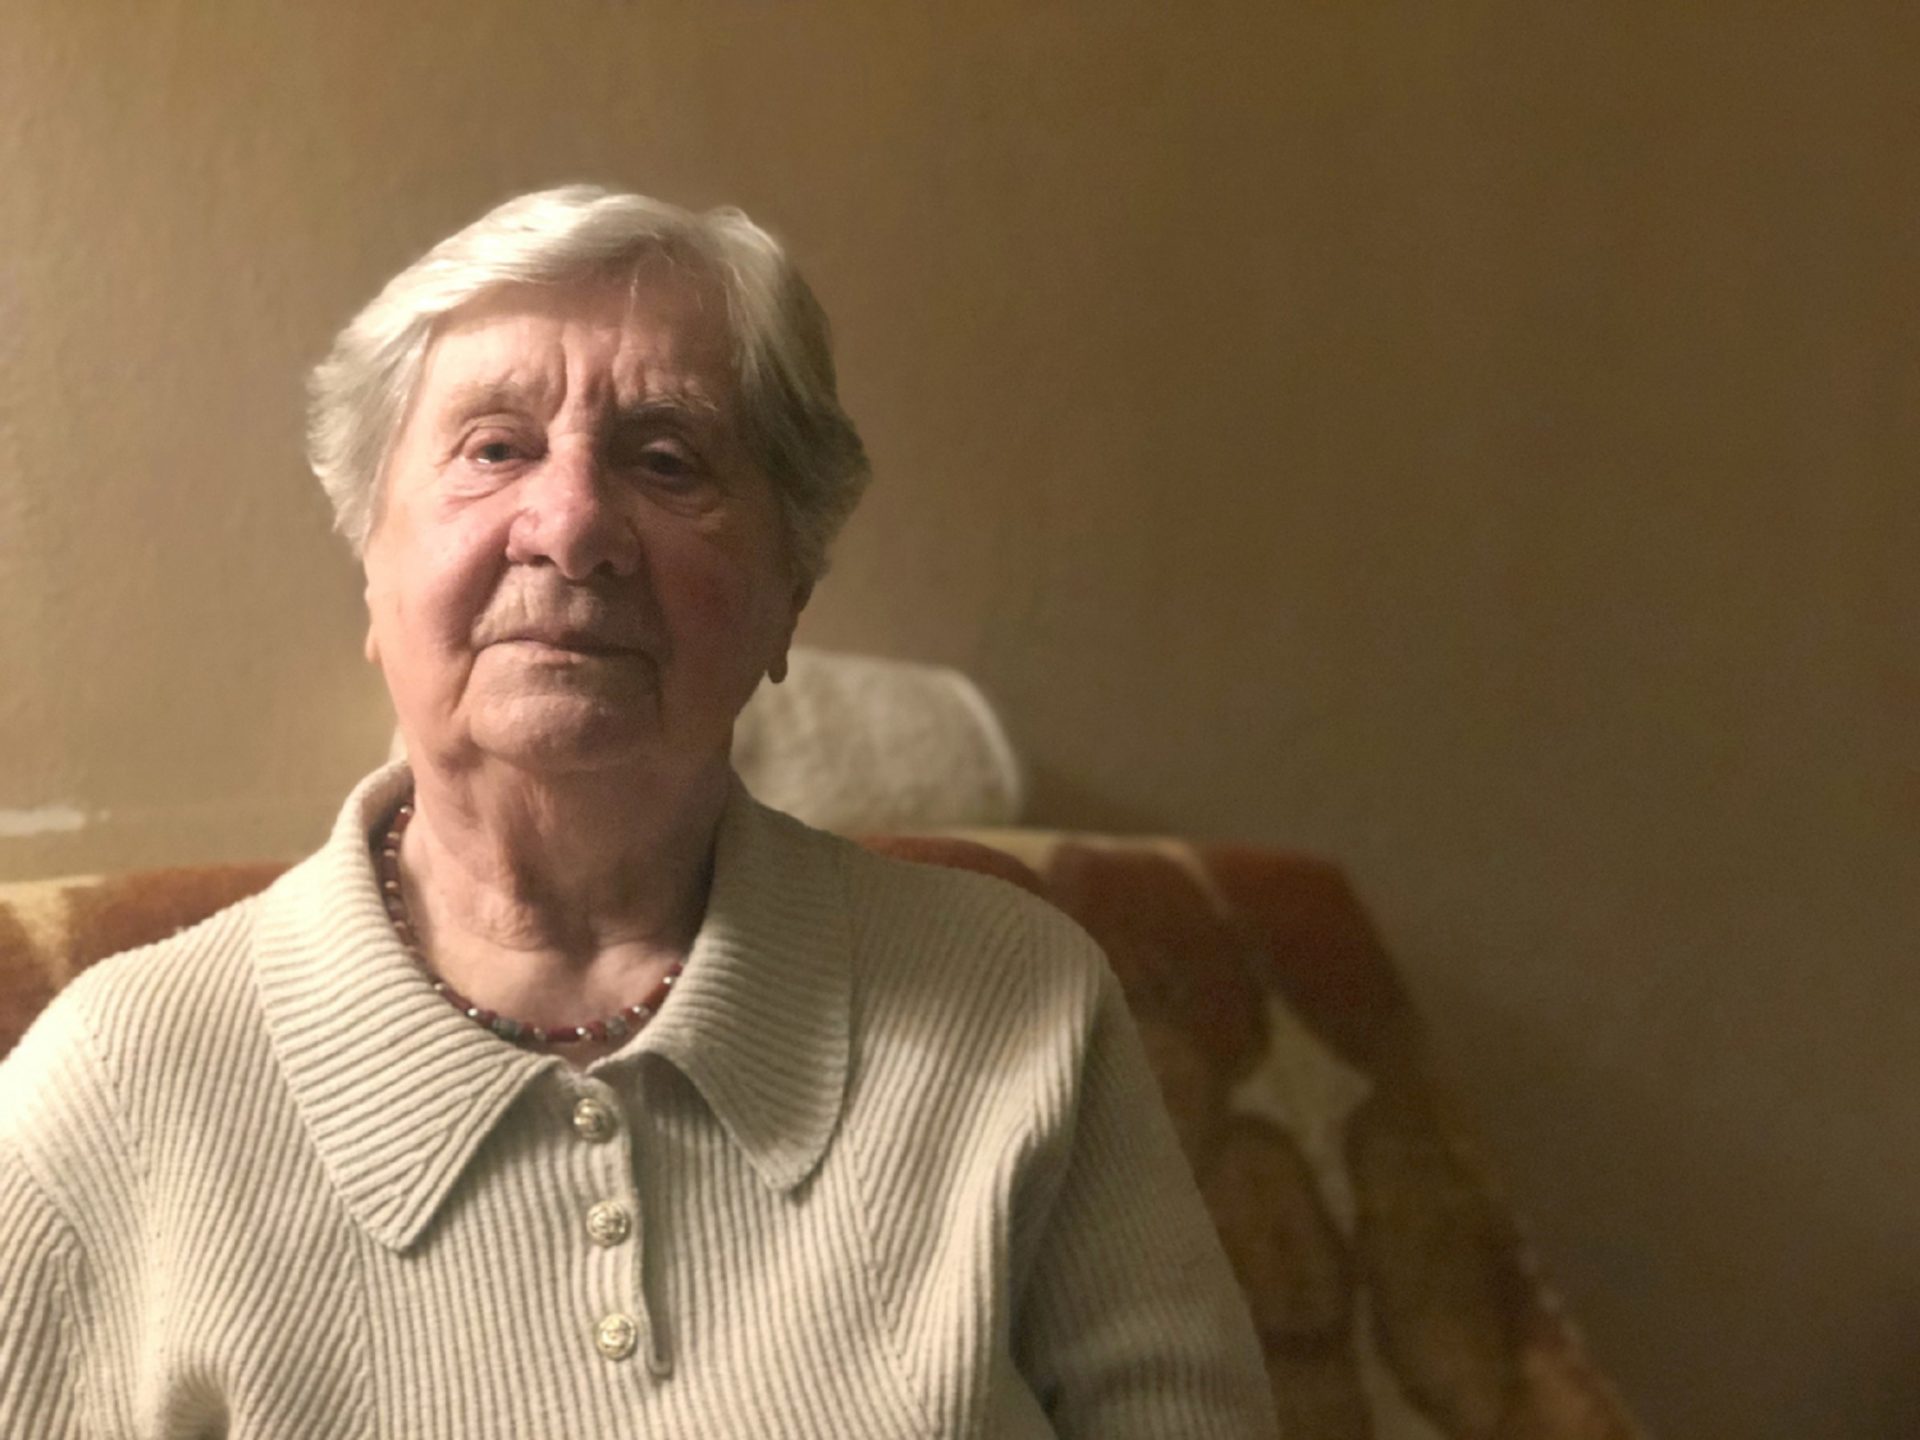 Janina Iwanska, 89, is photographed in her Warsaw apartment. She was sent to Auschwitz after she was separated from her parents at the age of 14 during the Warsaw Uprising in 1944 when the Nazis laid siege to the city. She arrived to the death camp at the height of its exterminations, when the SS guards killed 330,000 people in a span of eight weeks.